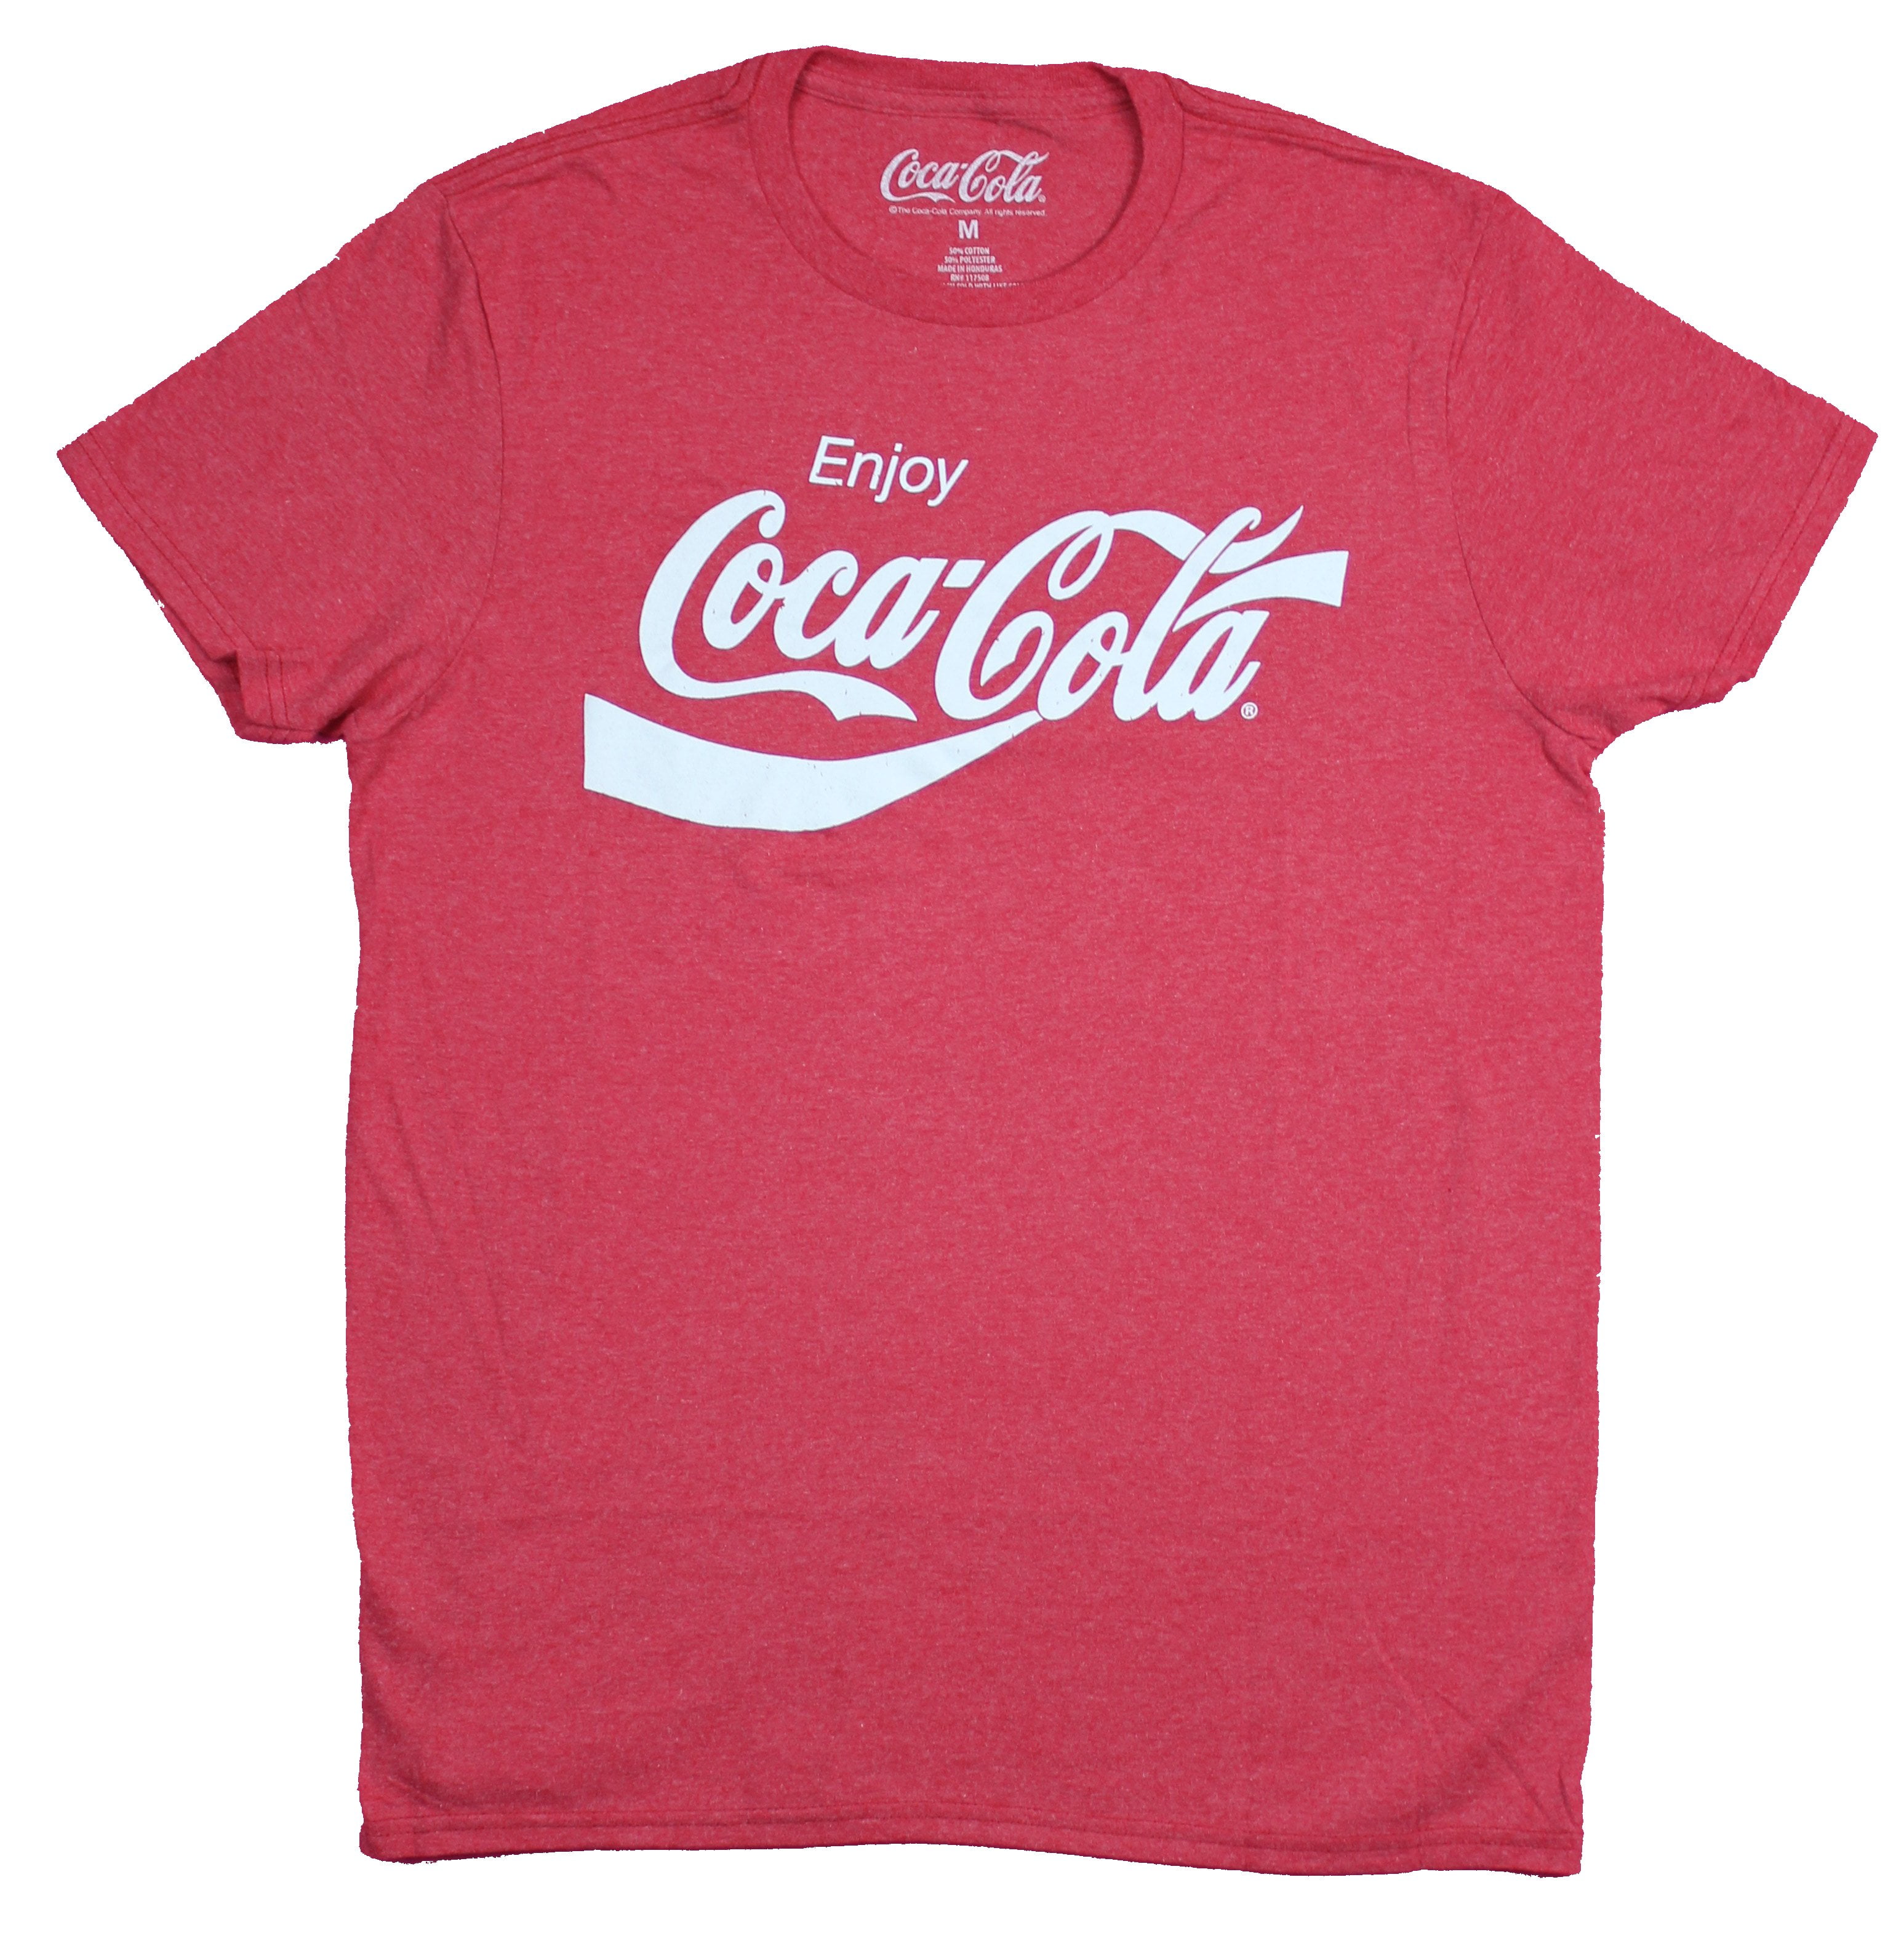 Coca-Cola  Red Long Sleeve Tee T-shirt w/ Faded Coca-Cola Logo X-Large XL 